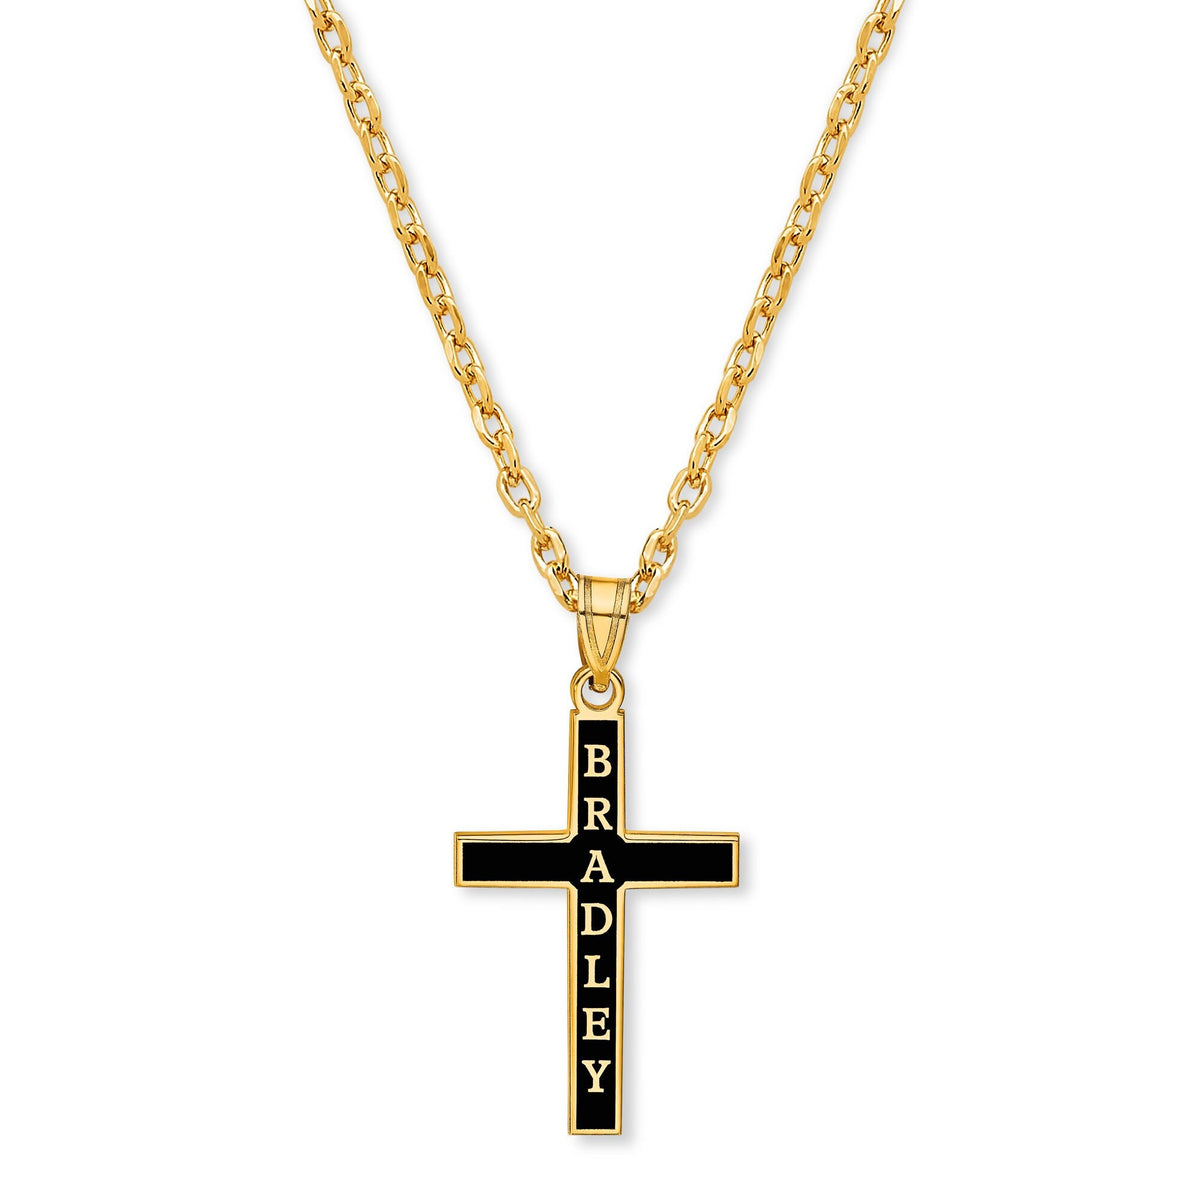 Personalized Cross with Black Enamel Antique Letters (1.25 inches Tall) & Necklace included  in Sterling Silver , Gold Plated or 10k Gold